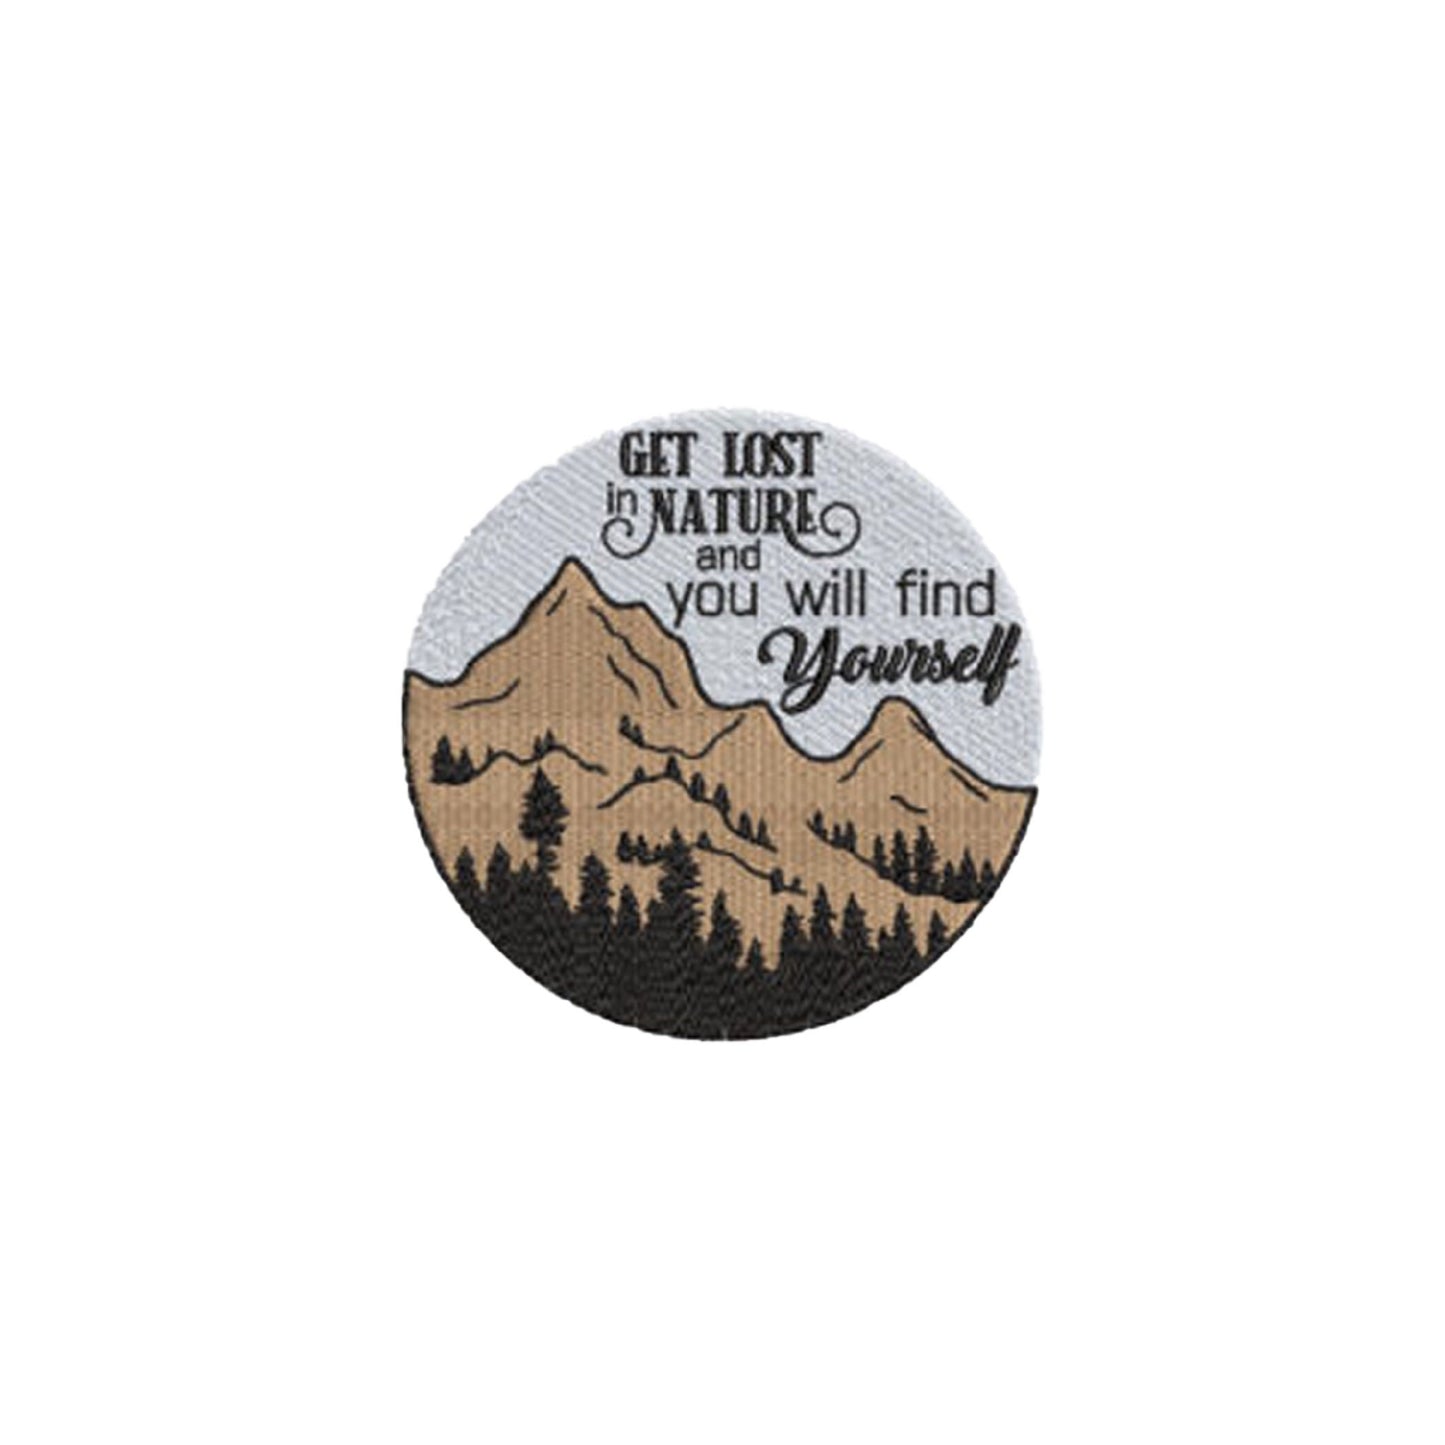 Iron on Patches / Sew on embroidered patches -Mountains Trees and a Wise Quote Embroidery Patchwork - Holidays Trees  DIY Badge for Clothing